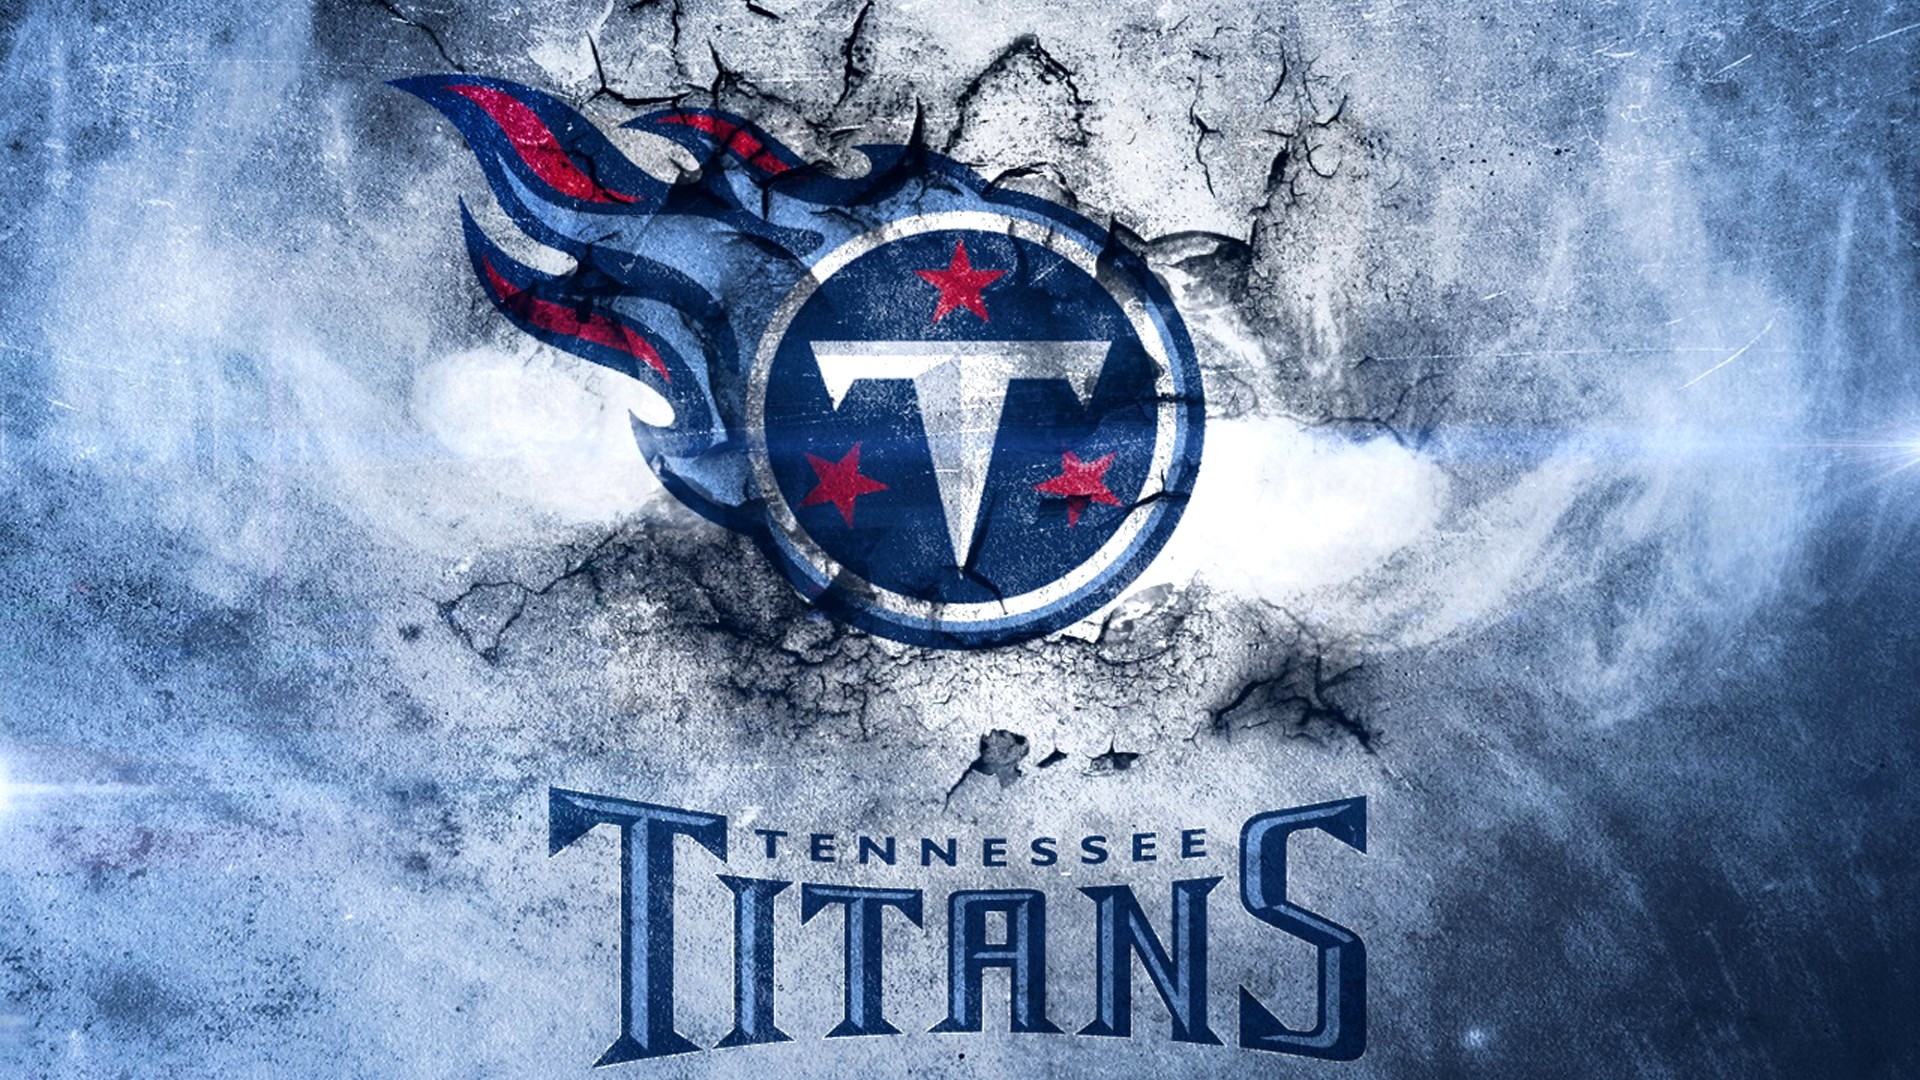 Tennessee Titans For Computer Wallpaper with high-resolution 1920x1080 pixel. You can use and set as wallpaper for Notebook Screensavers, Mac Wallpapers, Mobile Home Screen, iPhone or Android Phones Lock Screen